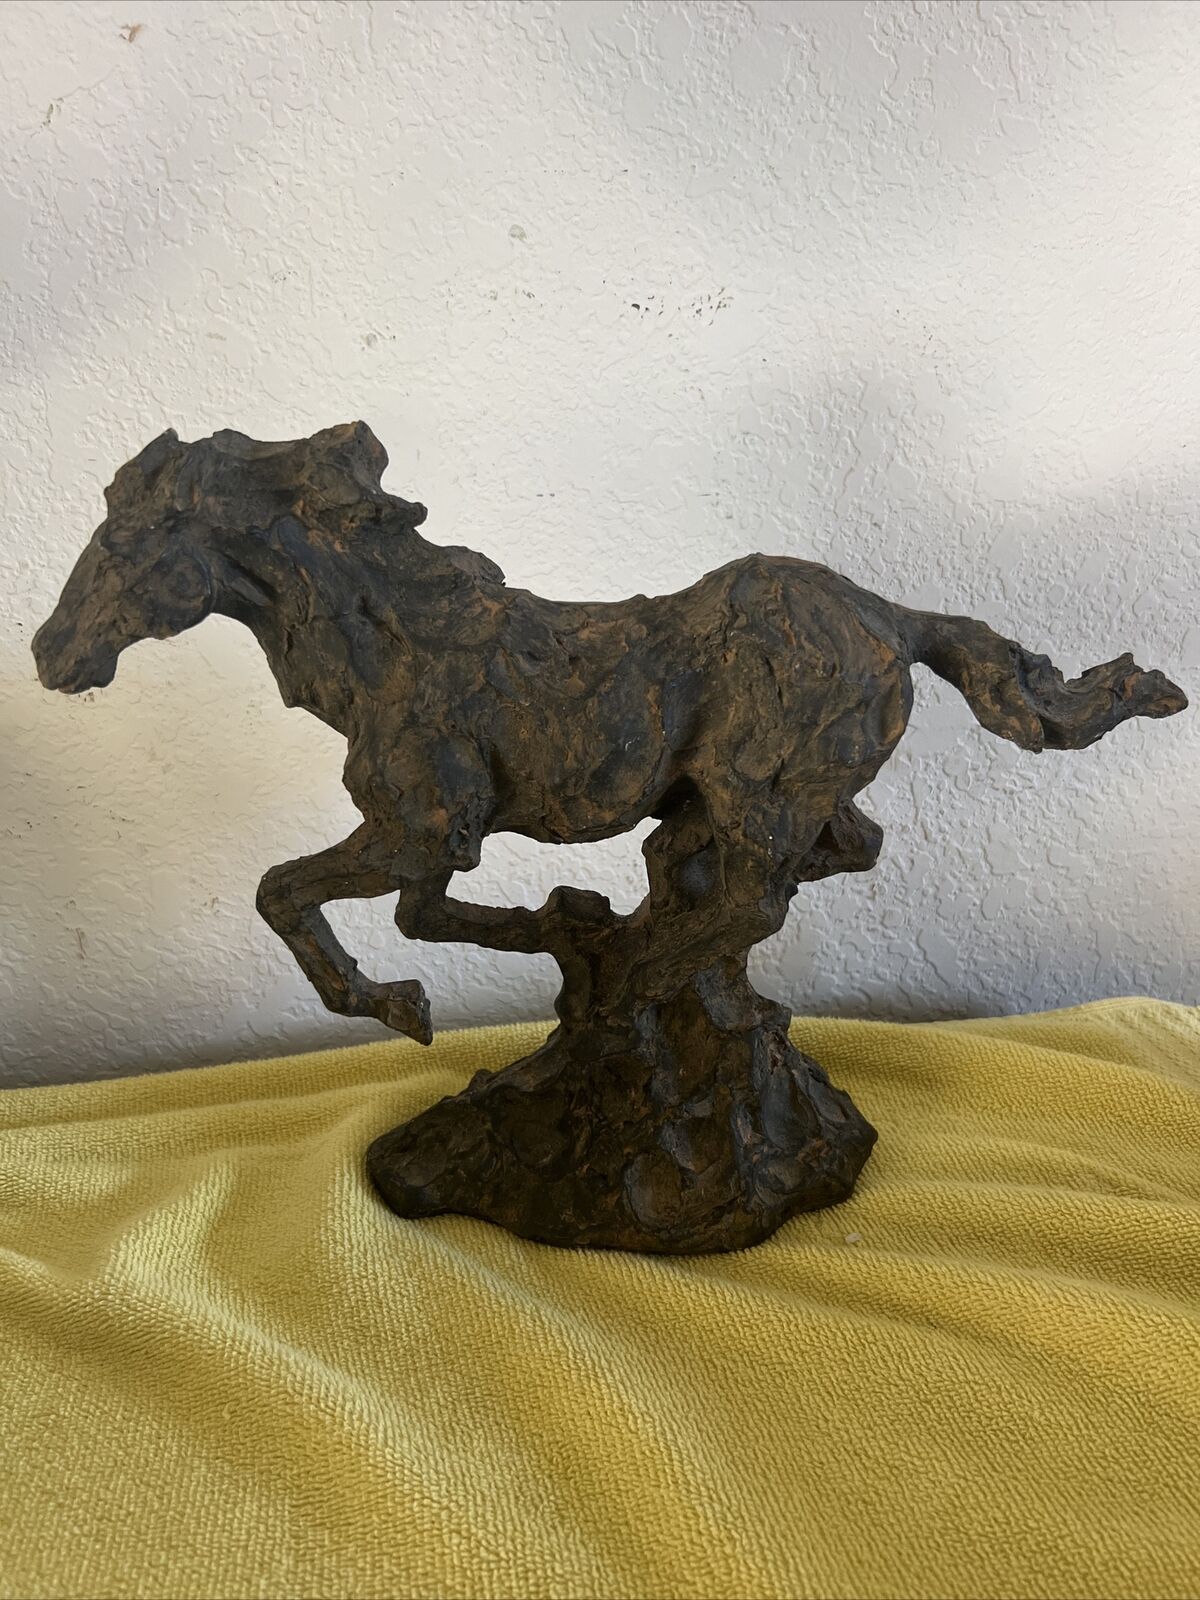 CLAY HORSE SCULPTURE EQUINE ART KENTUCKY THOROUGHBRED RACING EQUESTRIAN Unique